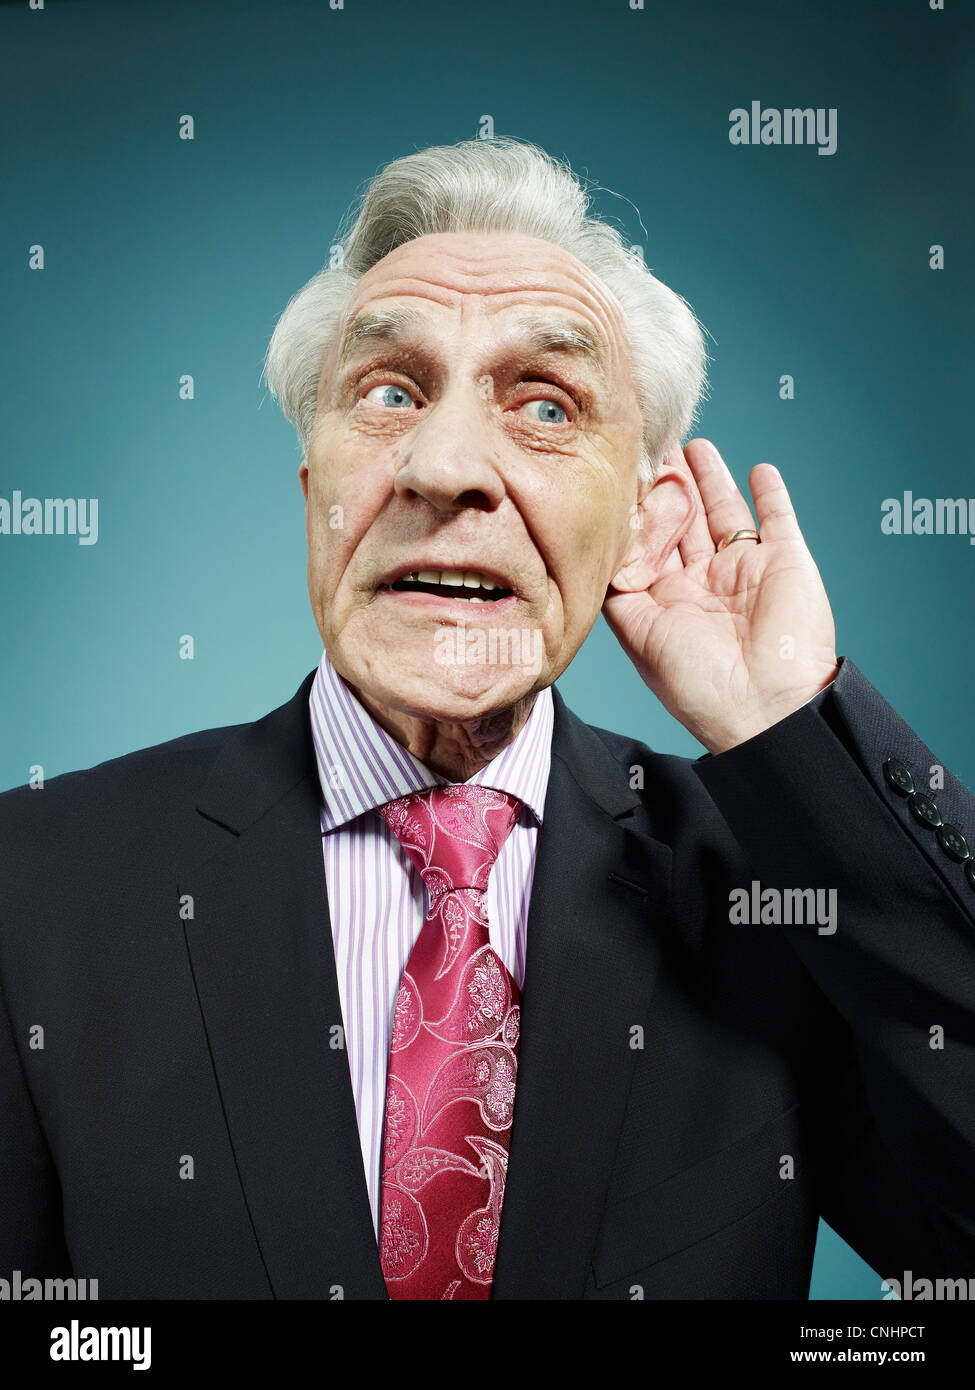 A senior man with his hand behind his ear Stock Photo